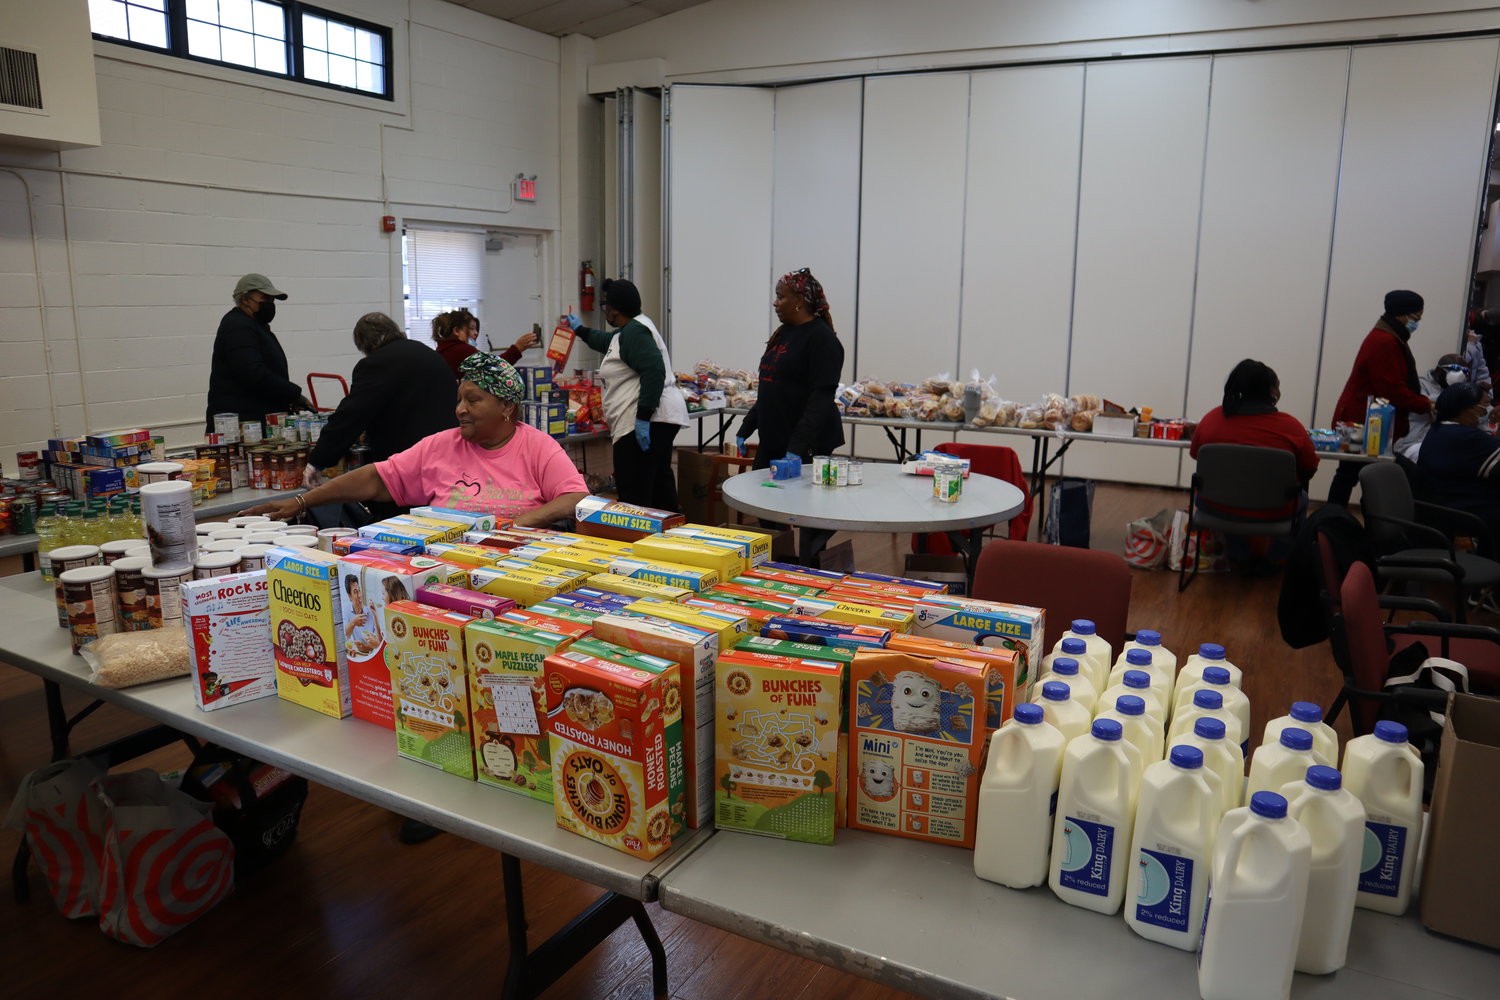 All the food at the pantry is donated or purchased with funds donated by individuals and community organizations.